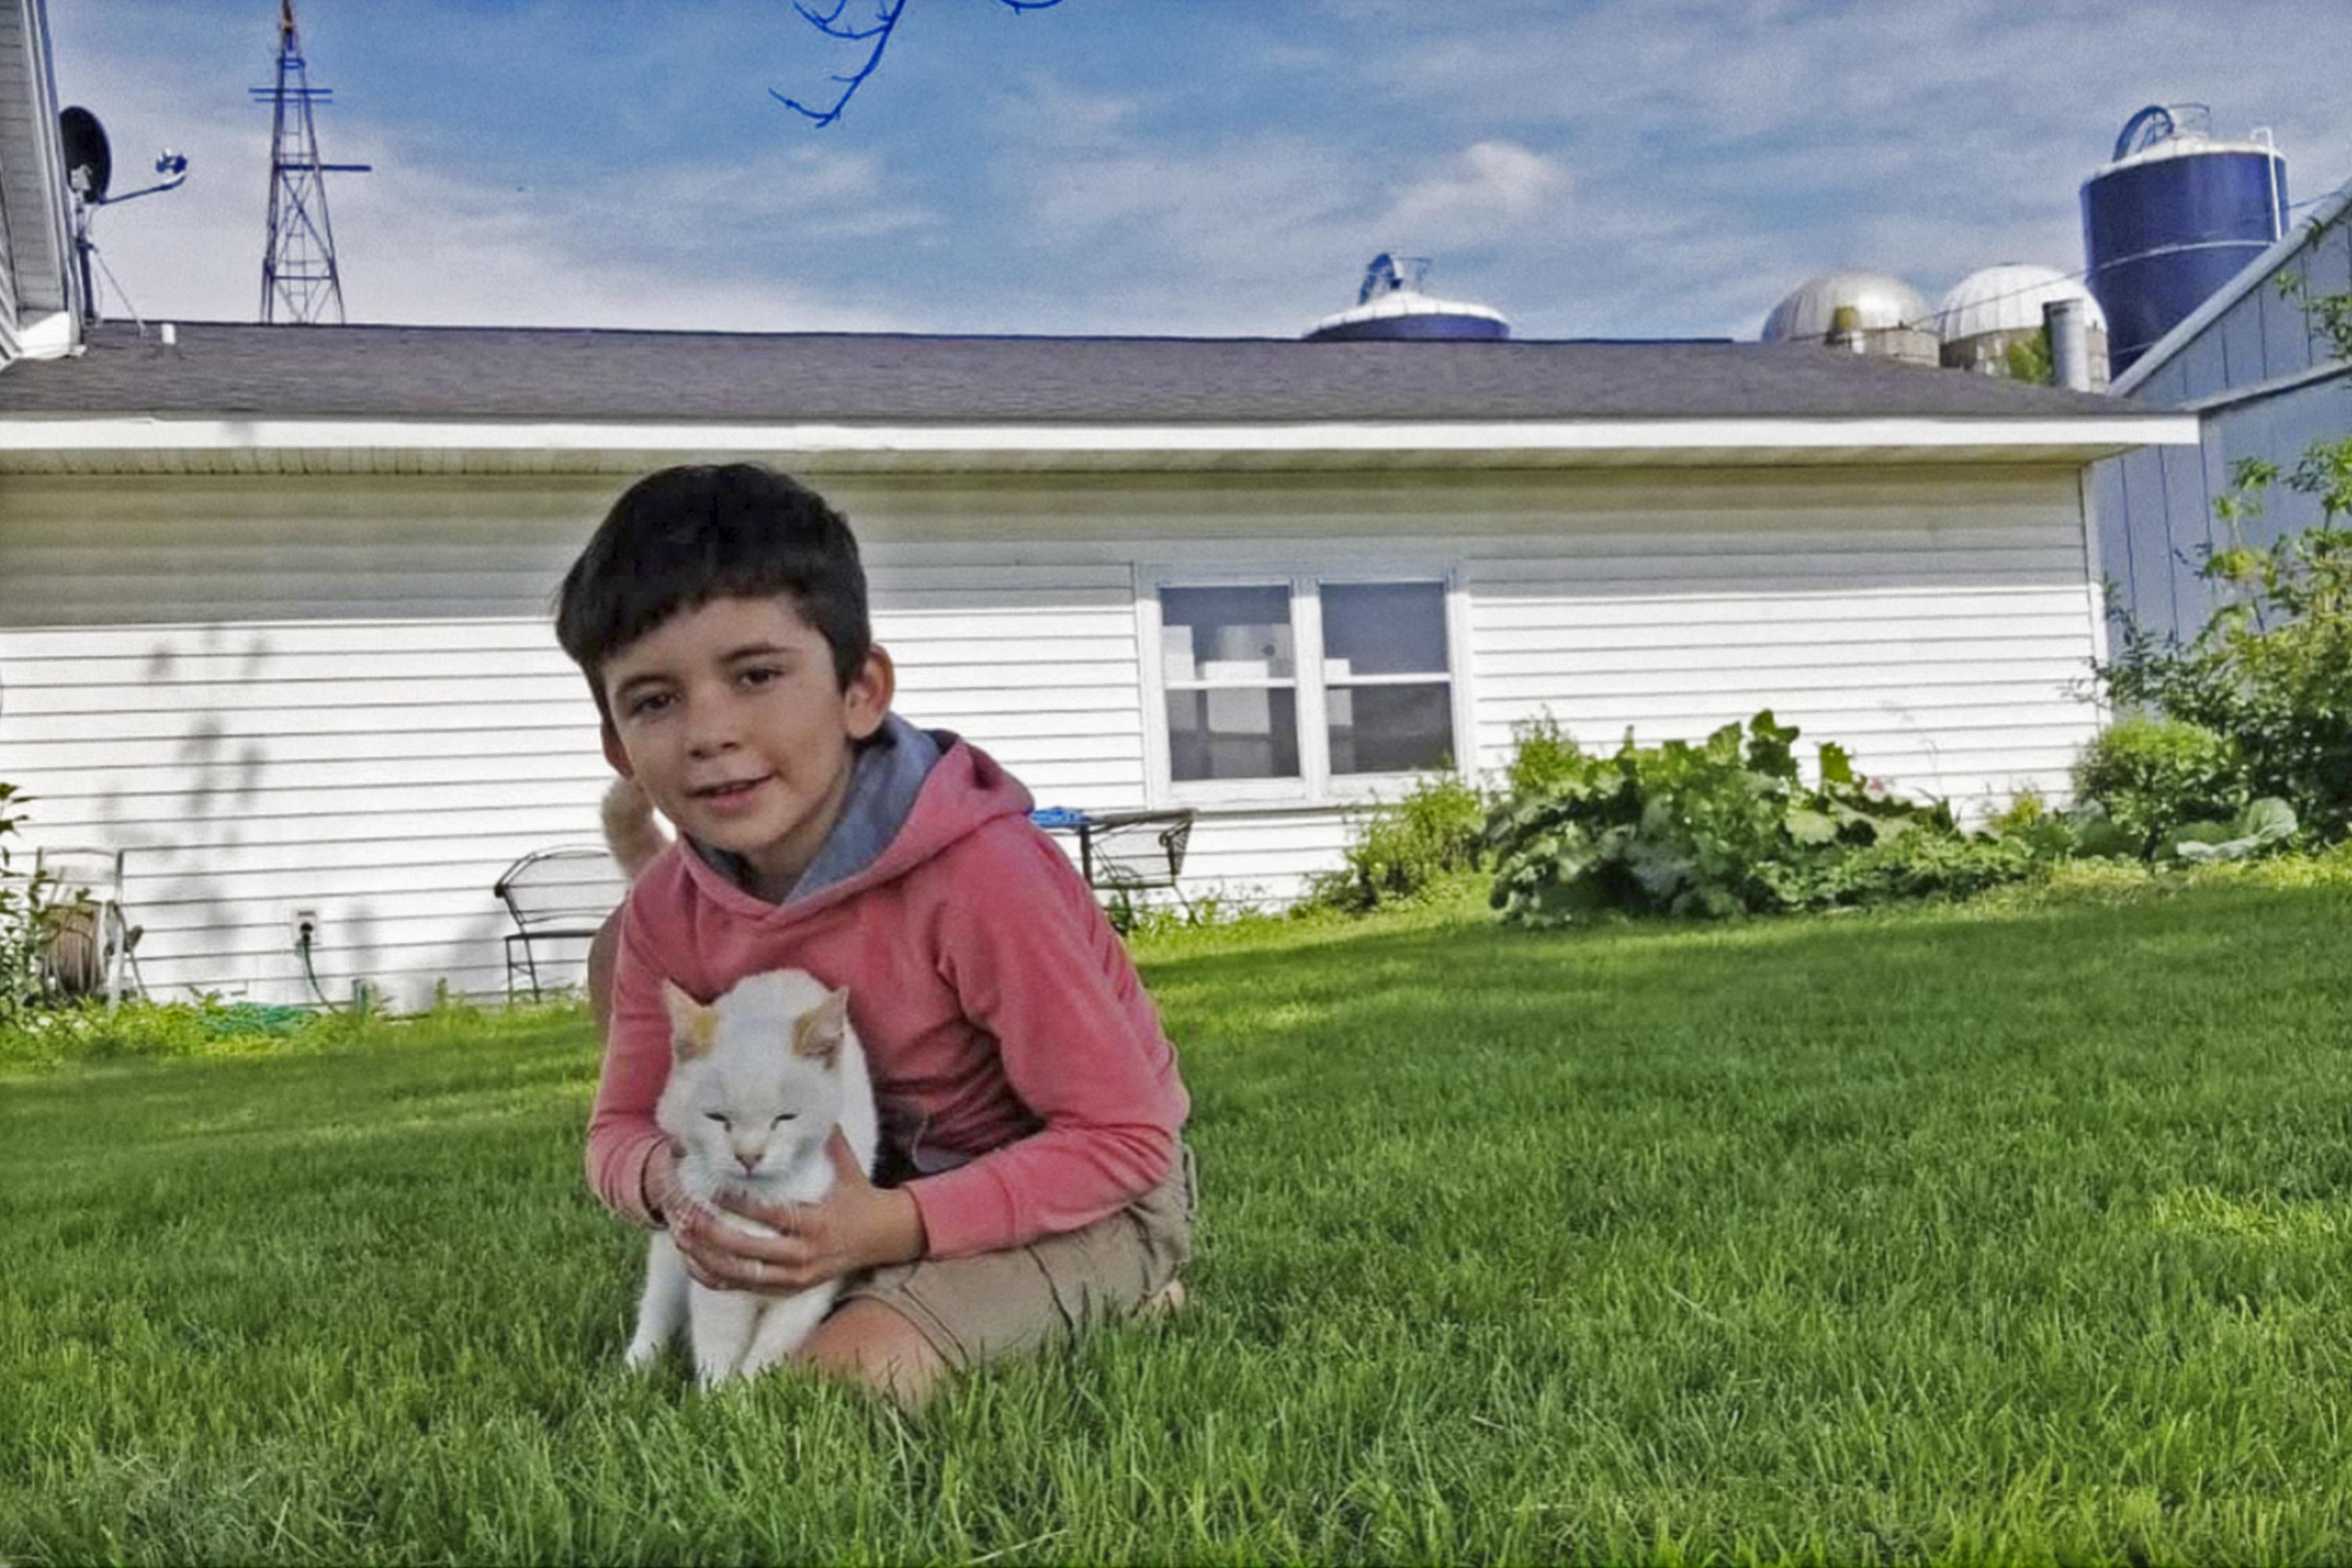 Nicaraguan child Jefferson Rodriguez, photographed by his father Jose at the D&K Dairy farm in Dane County, Wisconsin. El Faro photo: courtesy of José María Rodríguez Uriarte.